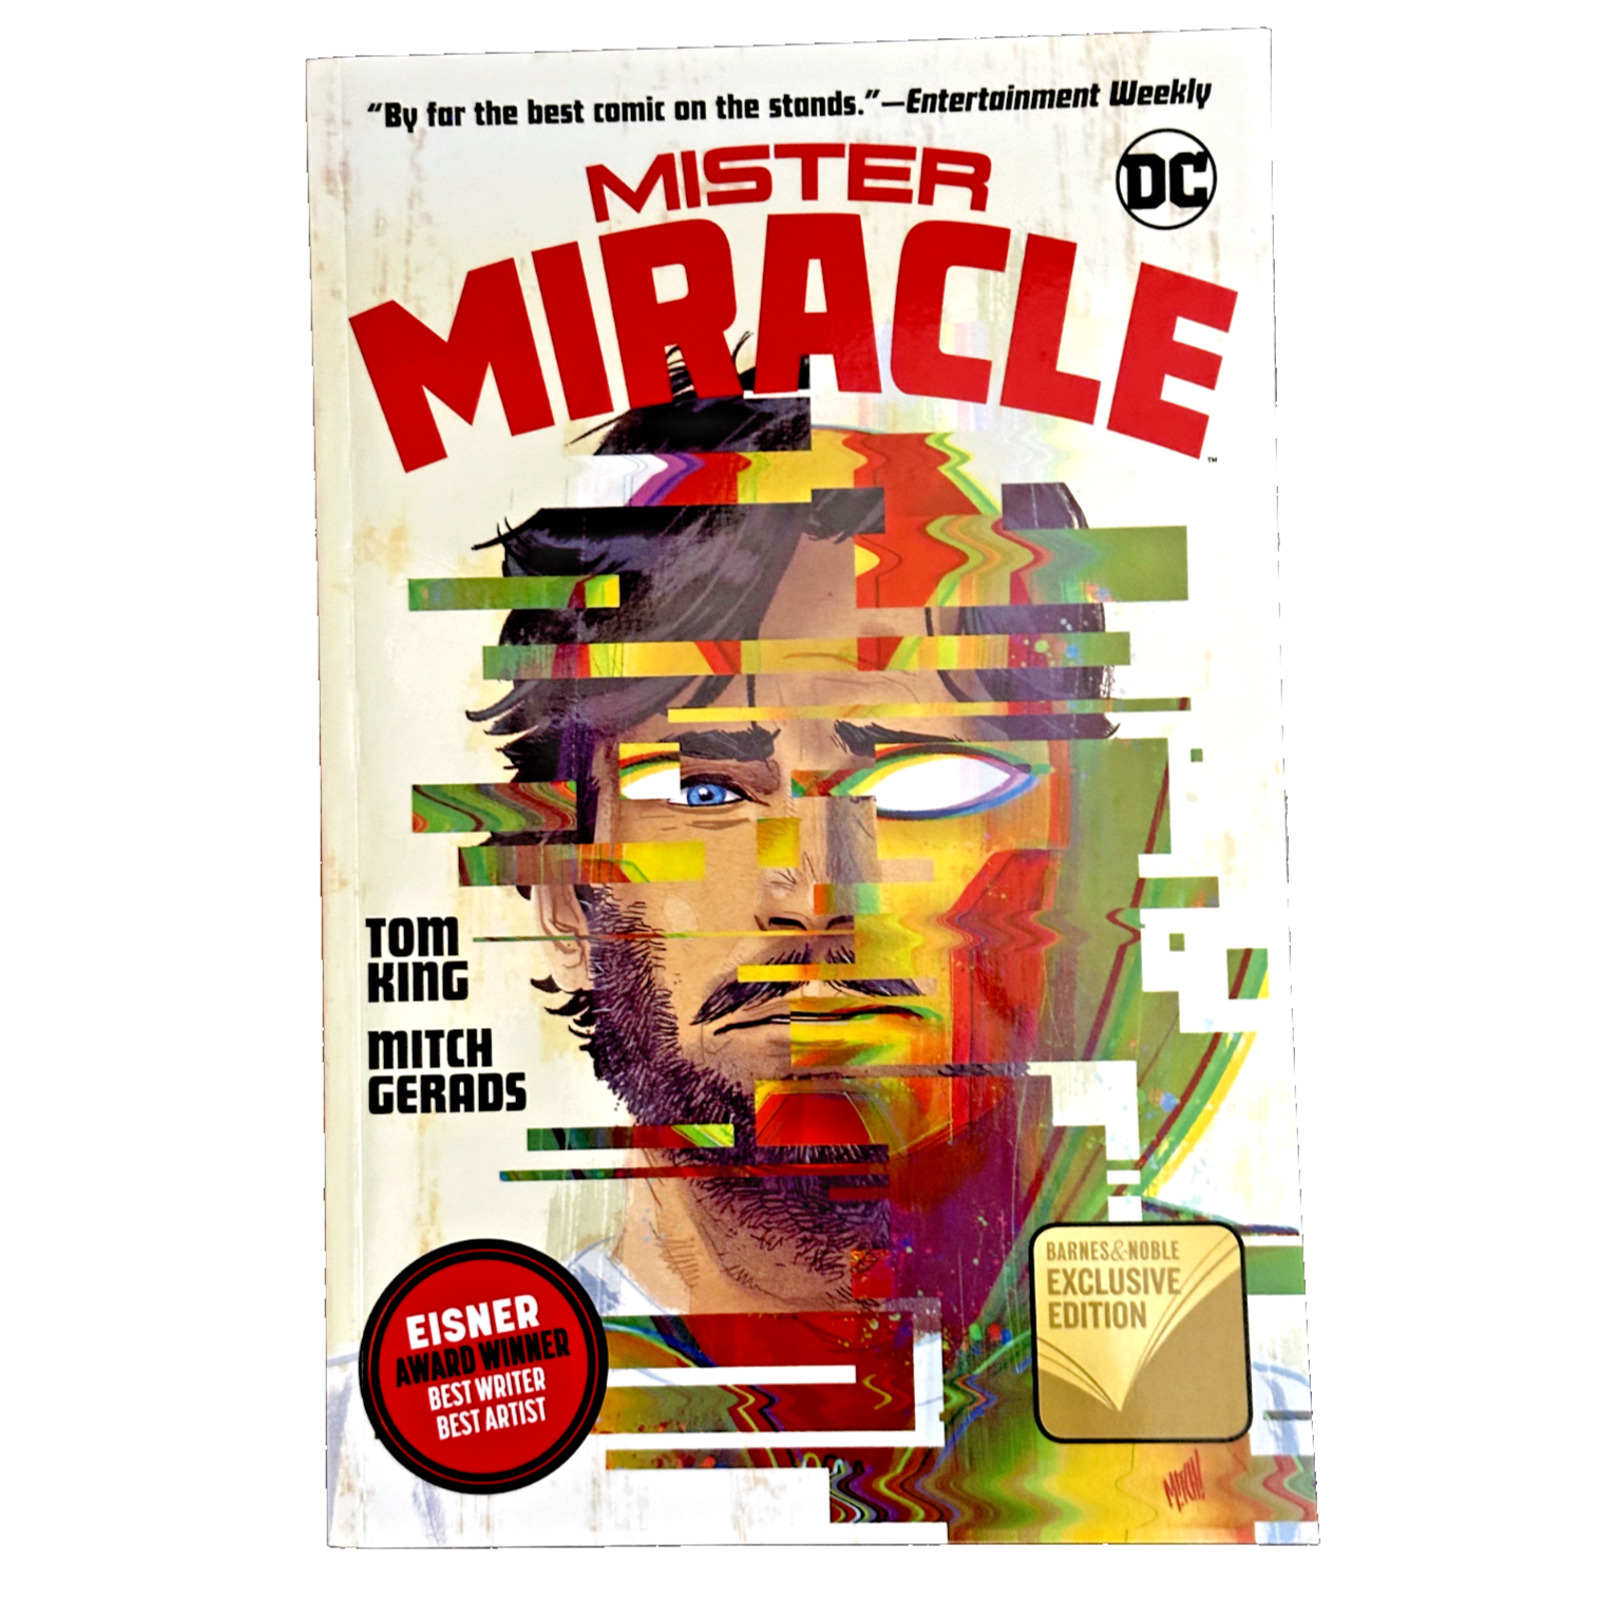 MISTER MIRACLE - Barnes & Noble Exclusive Edition - Graphic Novel TPB - DC